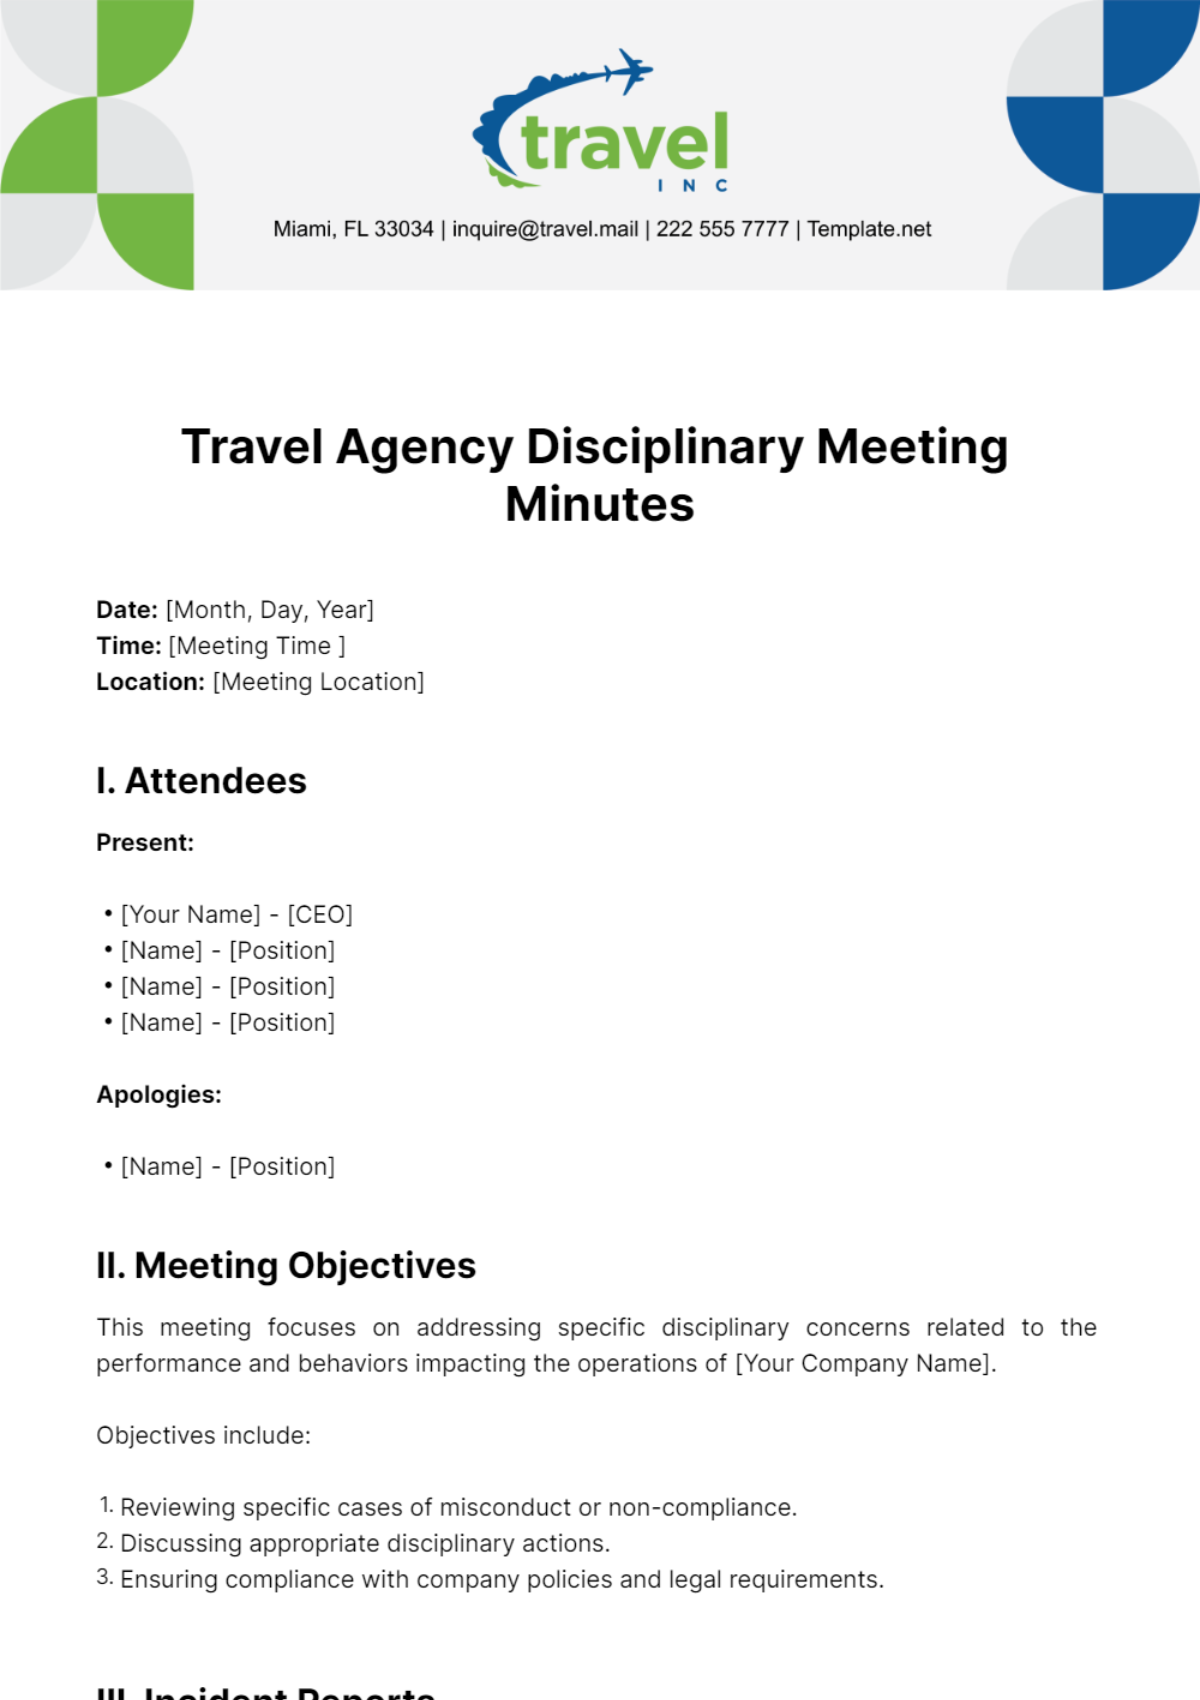 Travel Agency Disciplinary Meeting Minutes Template